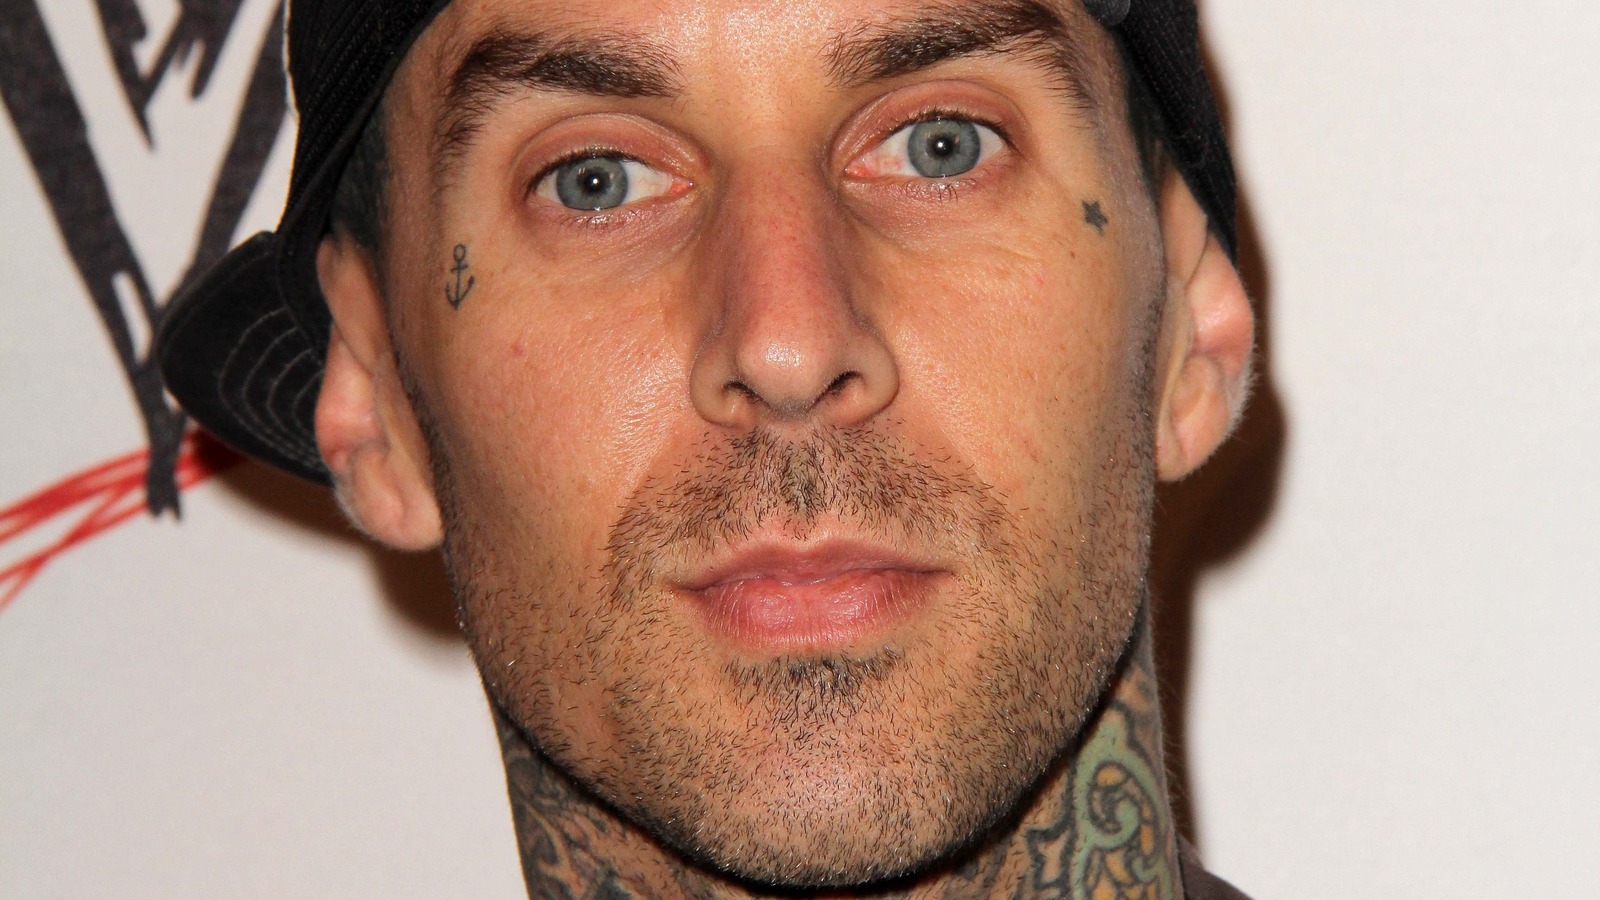 Travis Barker was married to someone else before Shanna Moakler, and she ha...